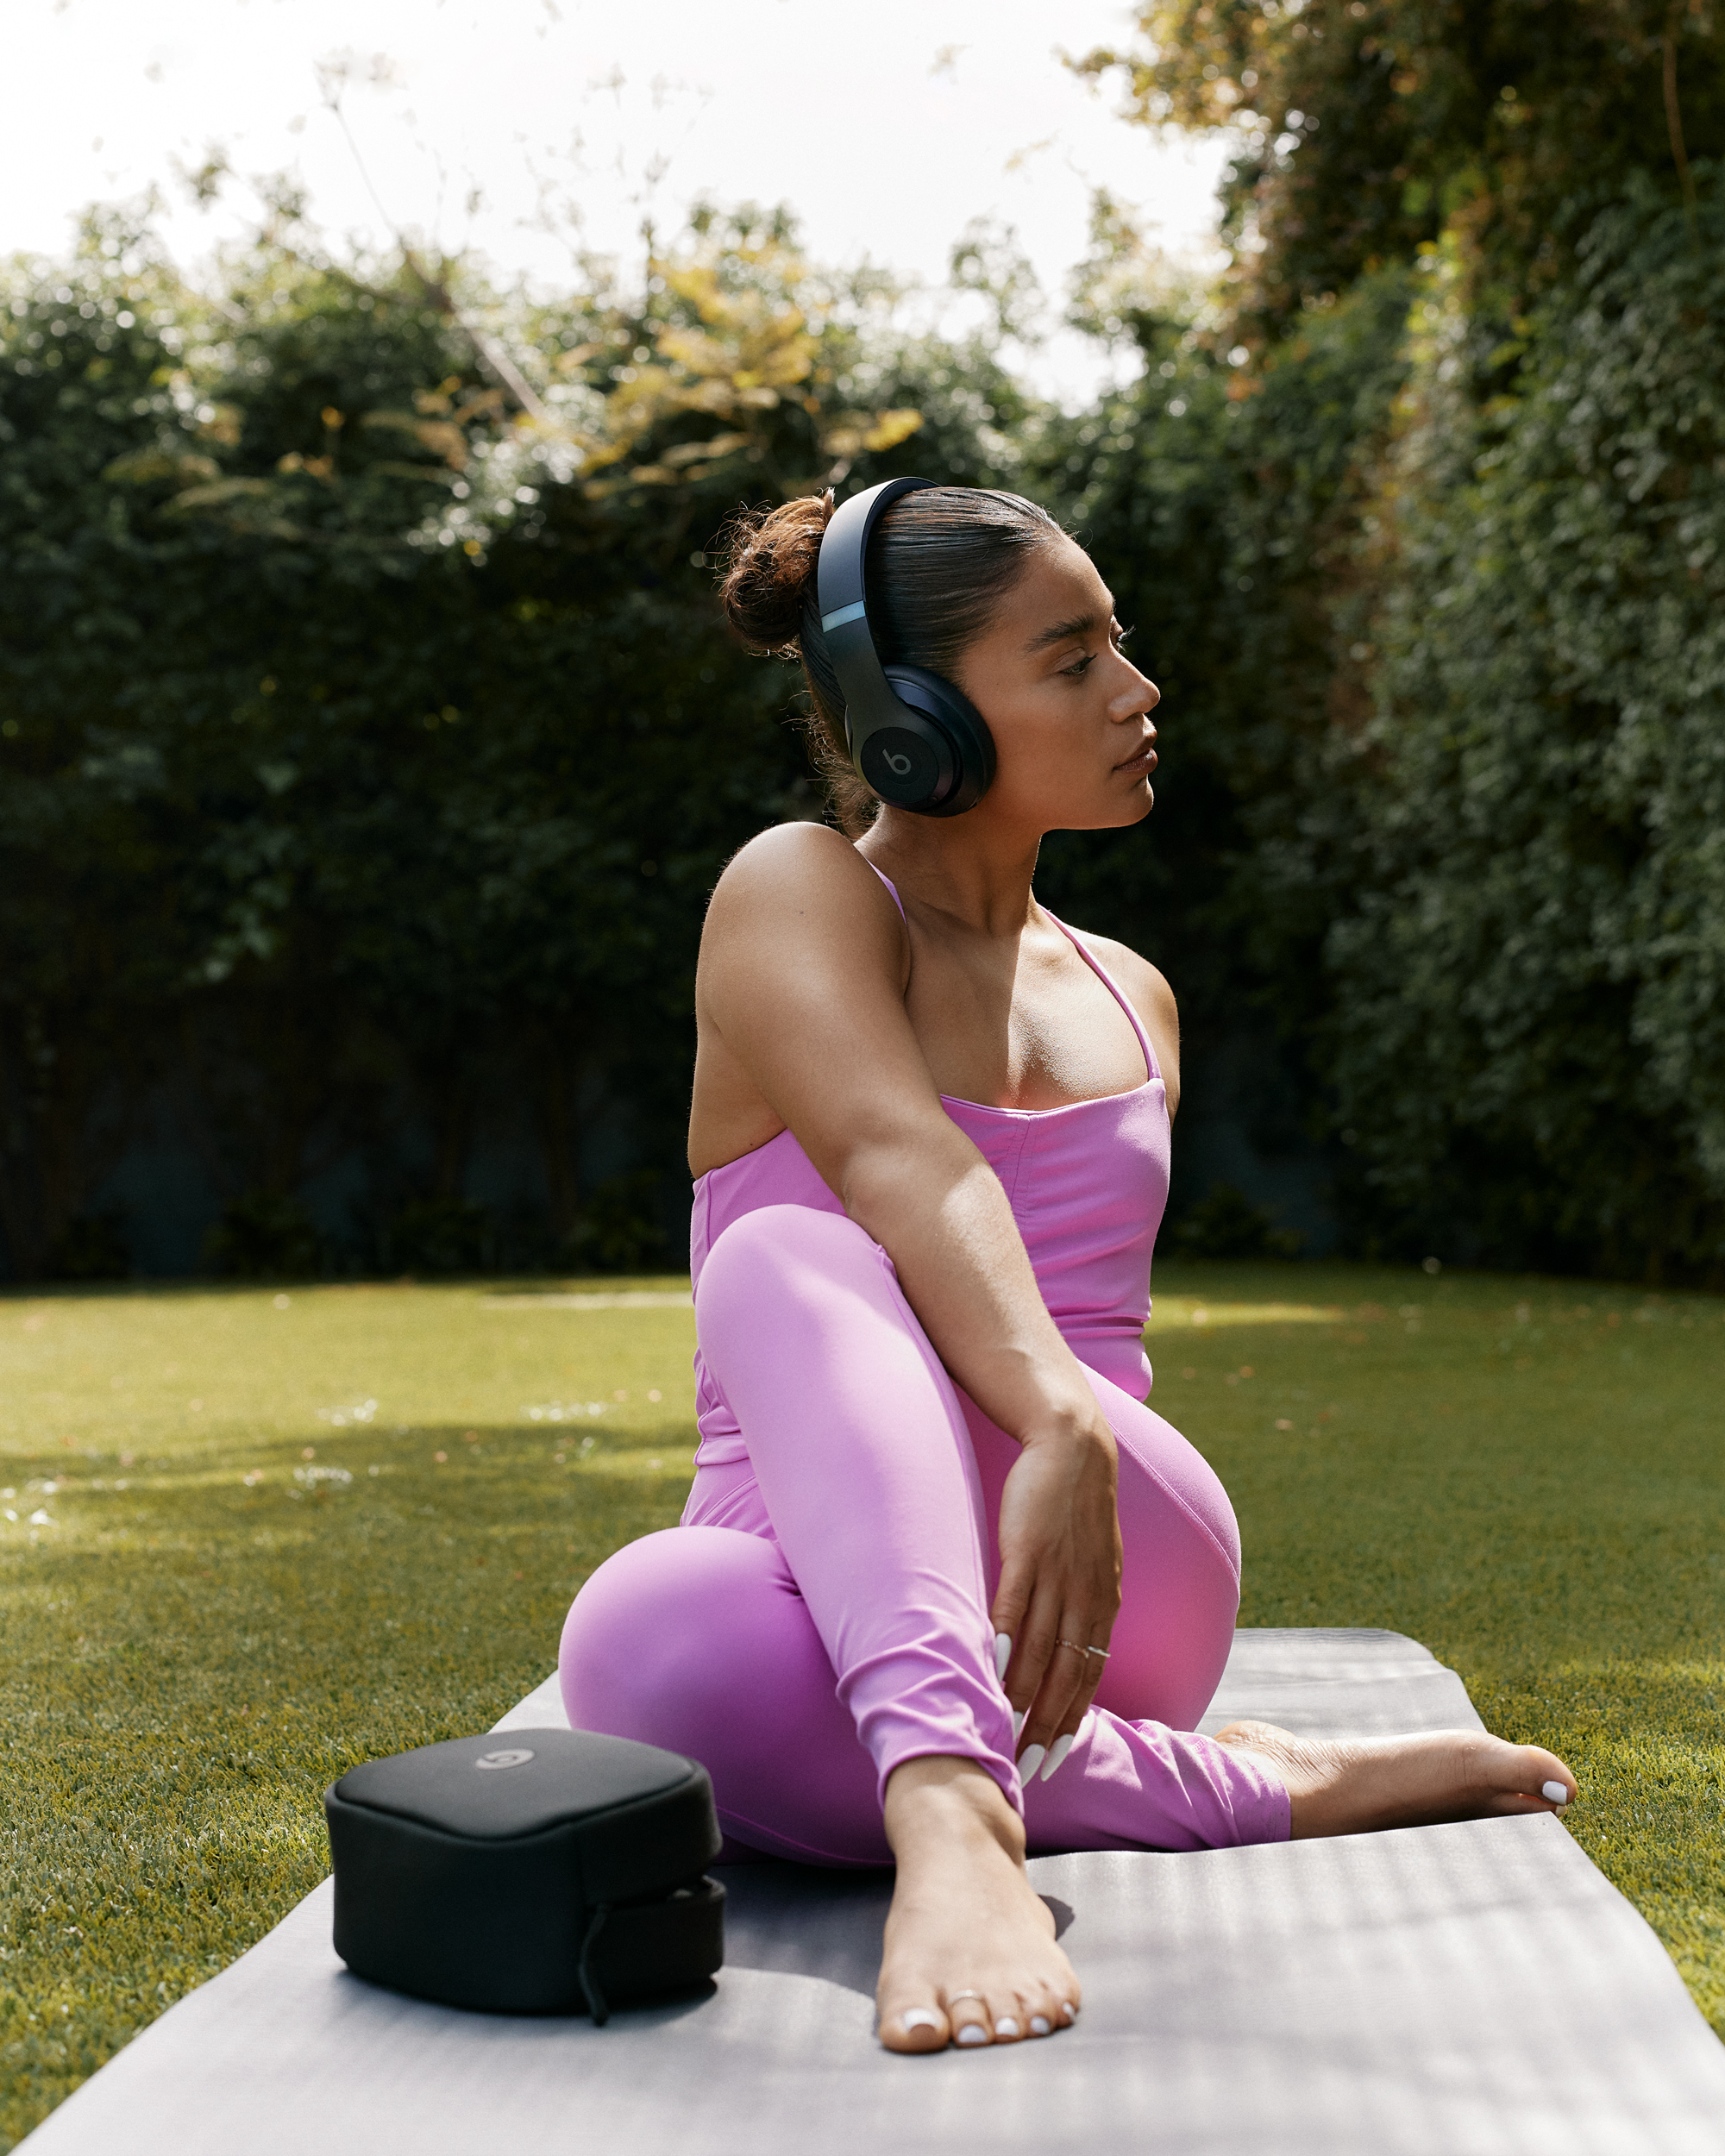 Beats Rolls Out New Line of Studio Headphones – The Hollywood Reporter